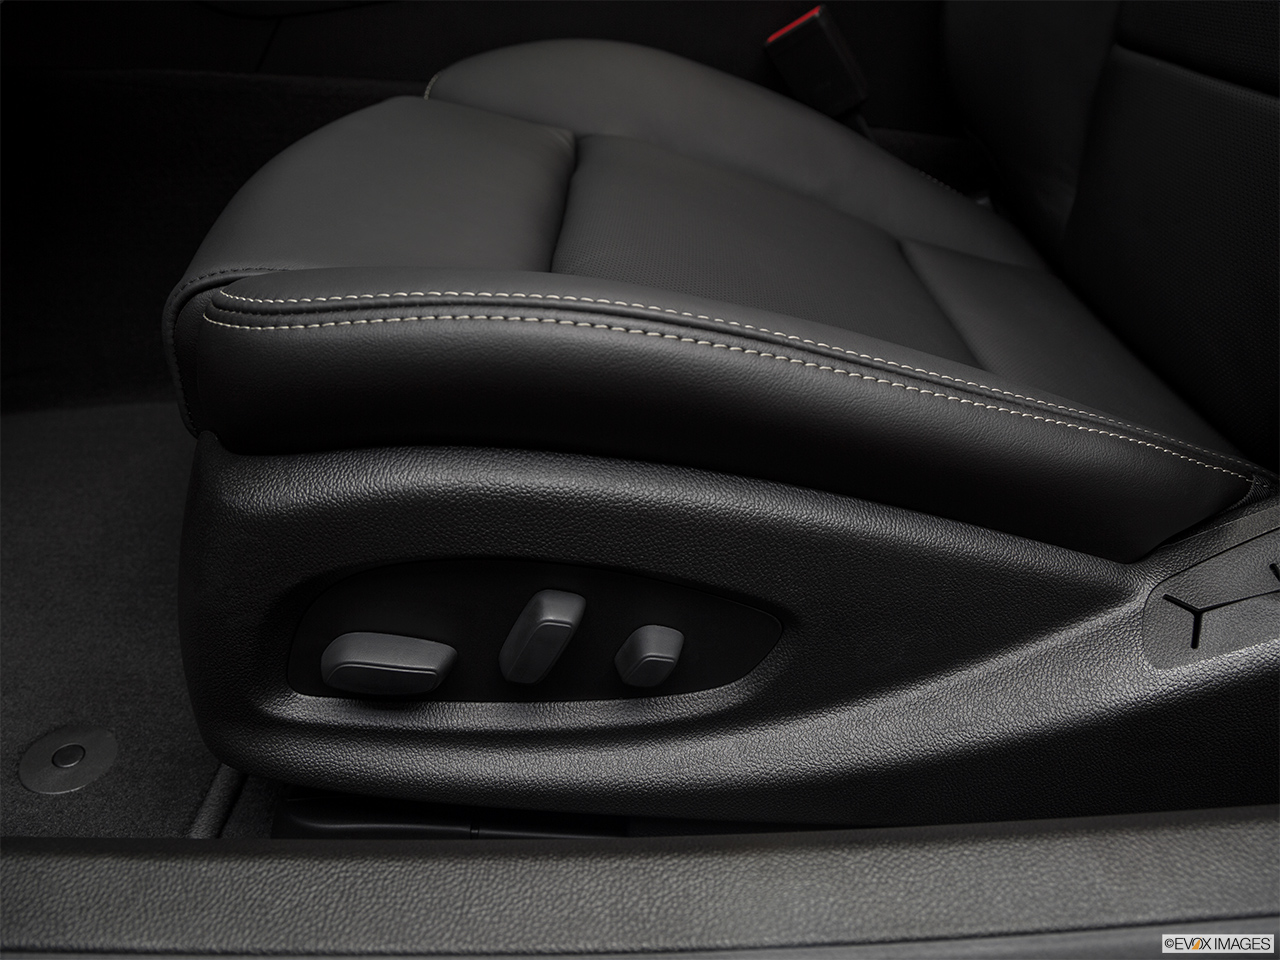 2019 Cadillac ATS Luxury Seat Adjustment Controllers. 